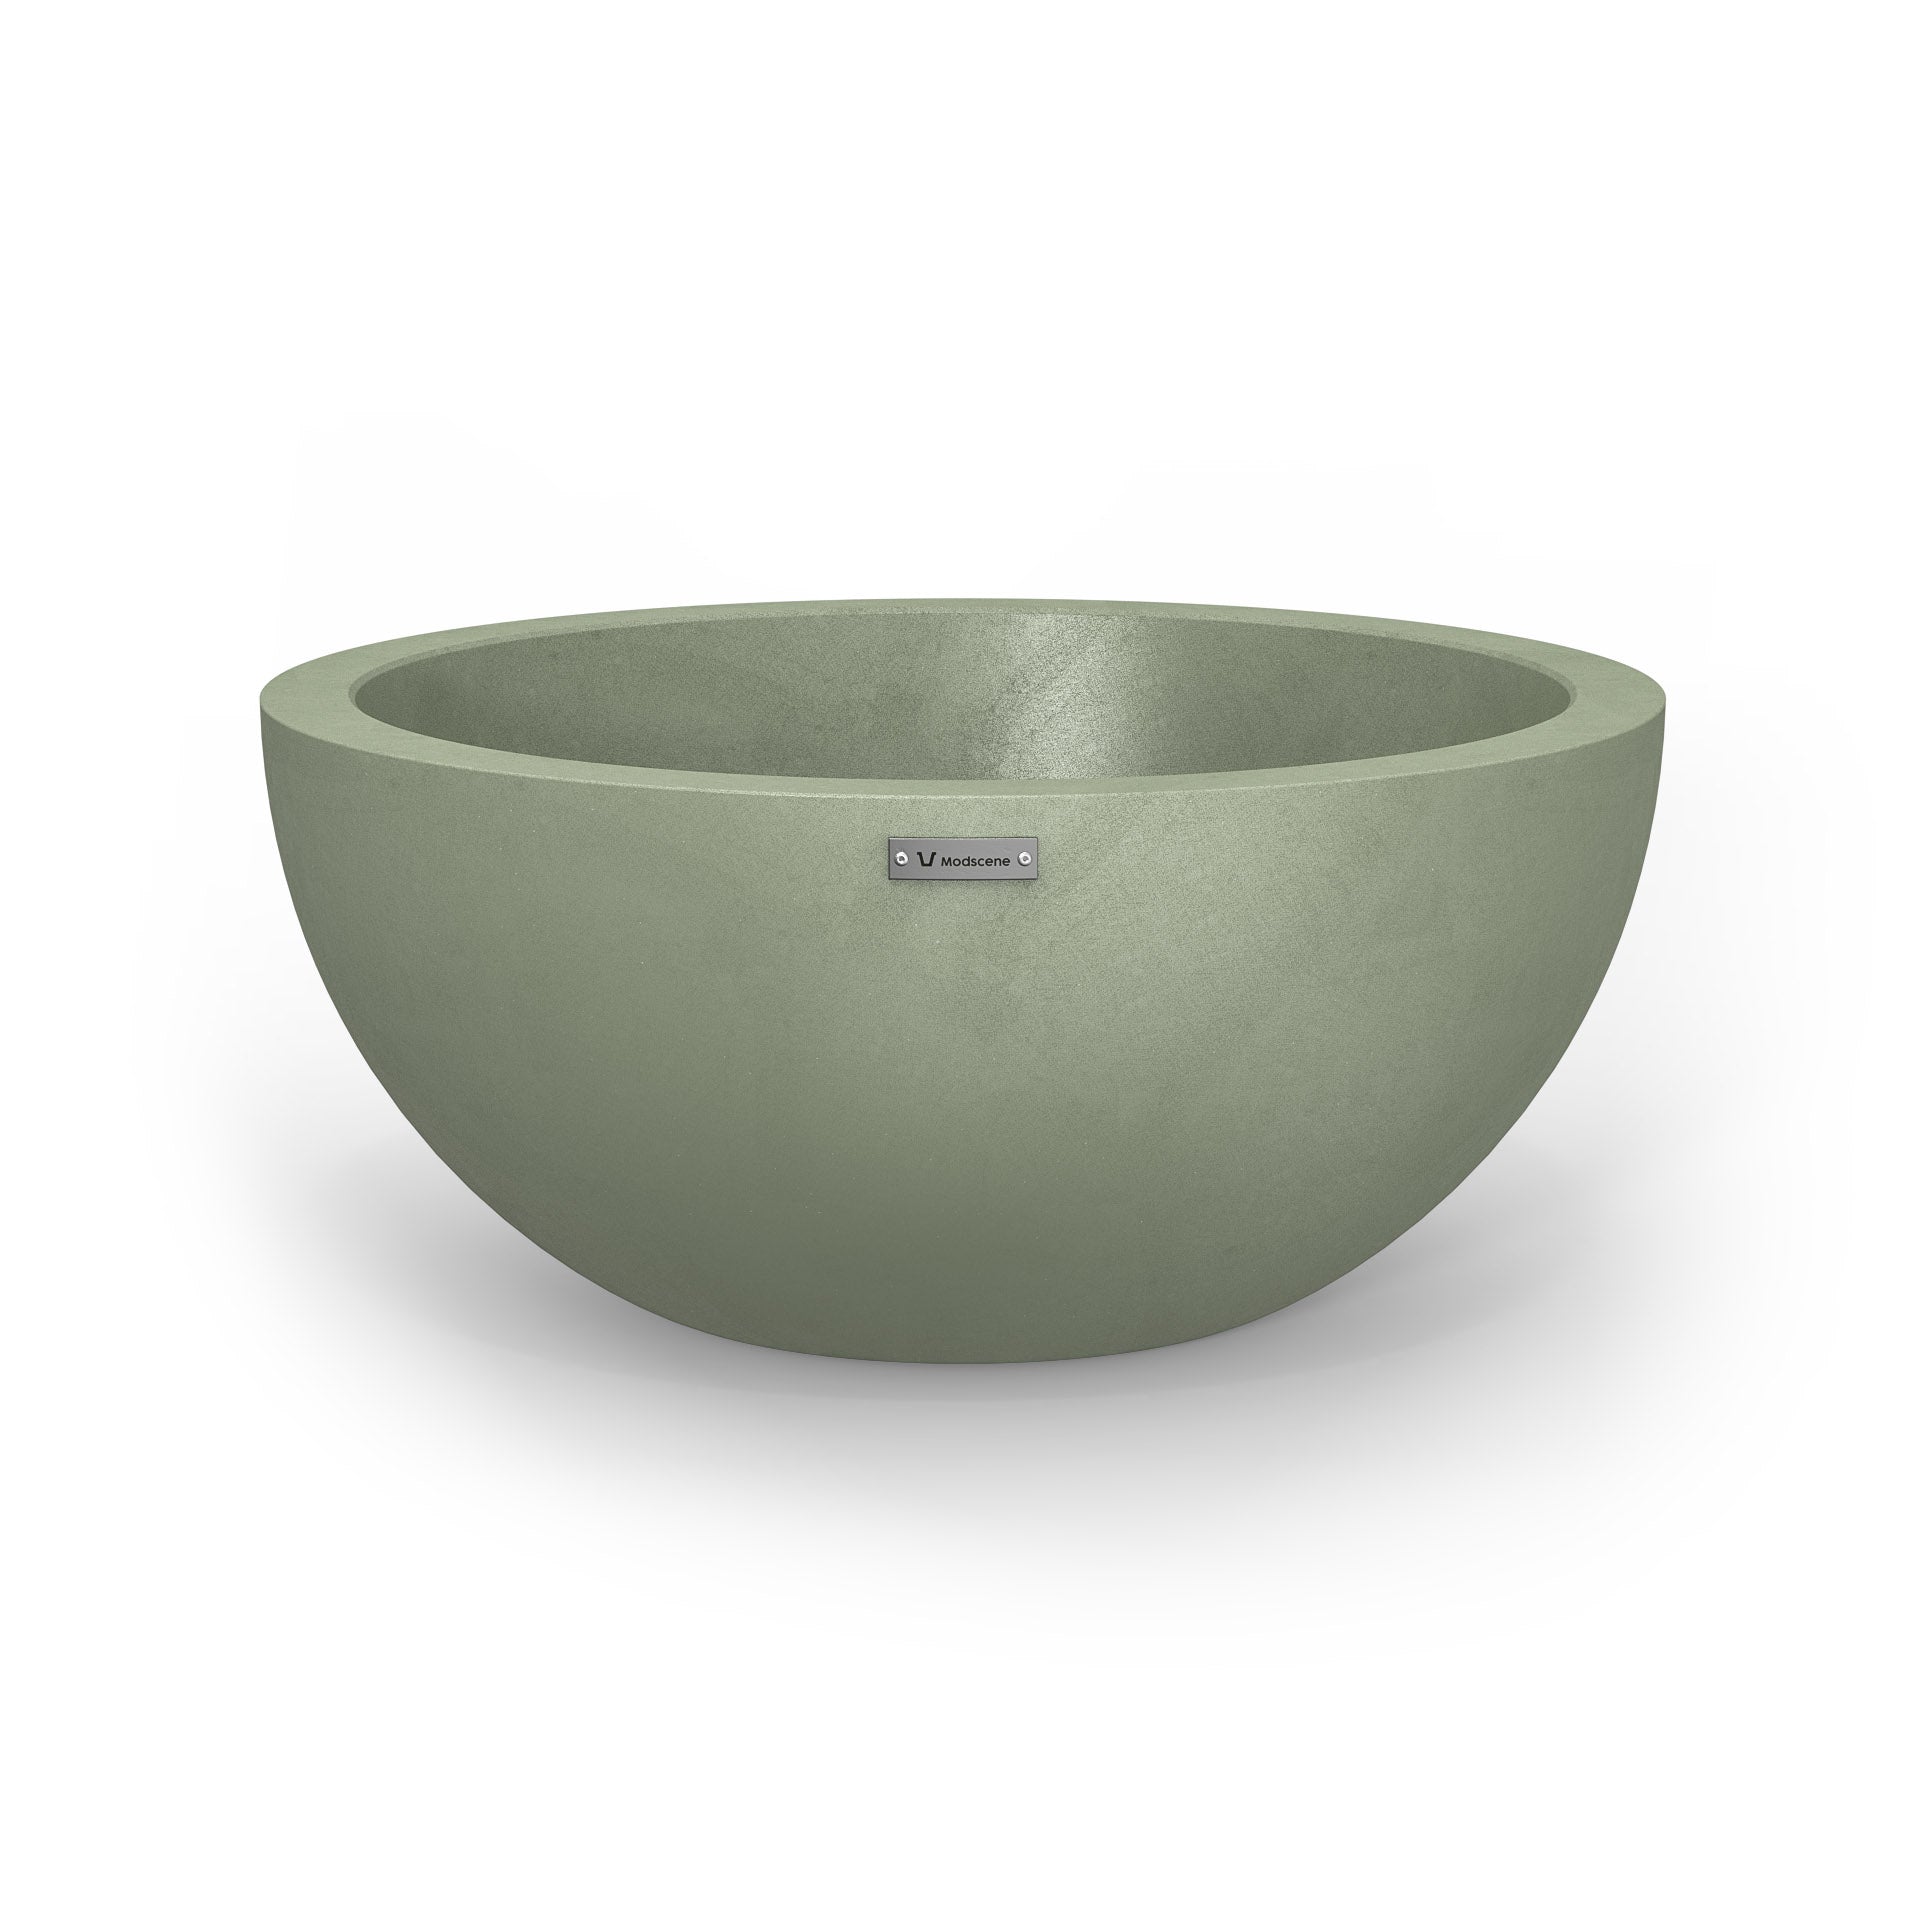 A large planter bowl in a pastel green colour with a concrete look finish.